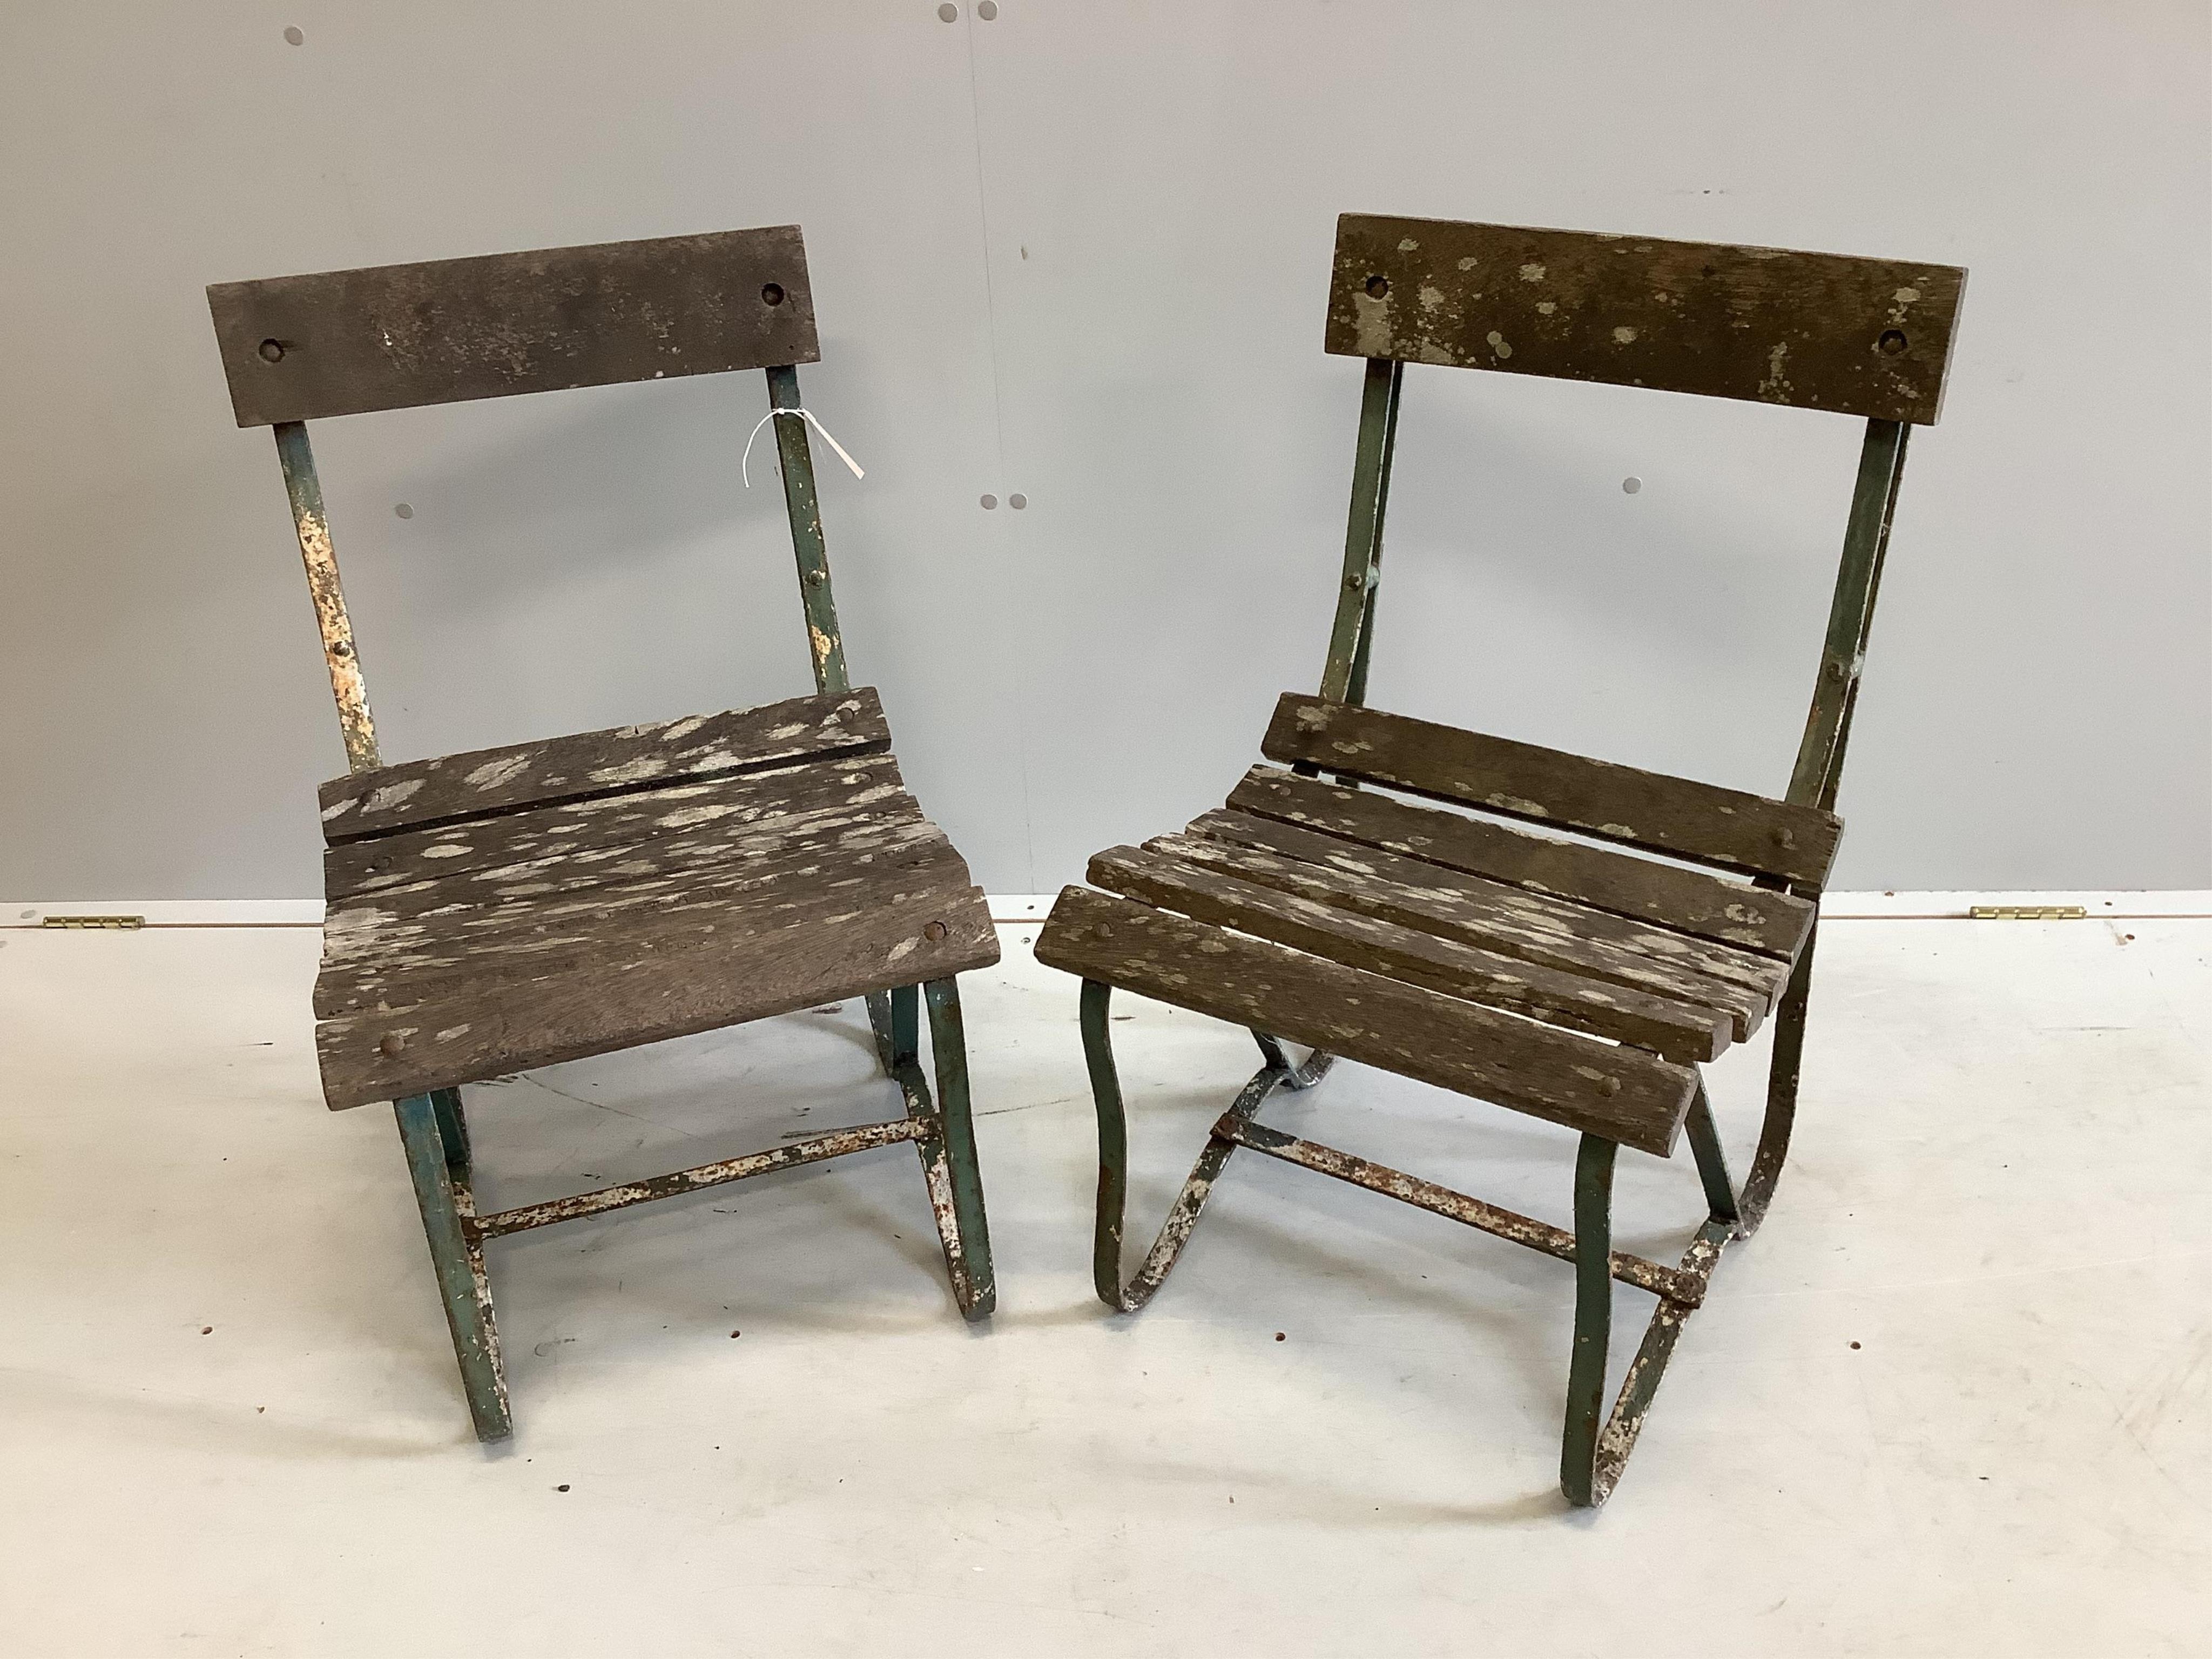 A pair of vintage slatted wrought iron garden chairs, width 45cm, depth 45cm, height 76cm. Condition - fair